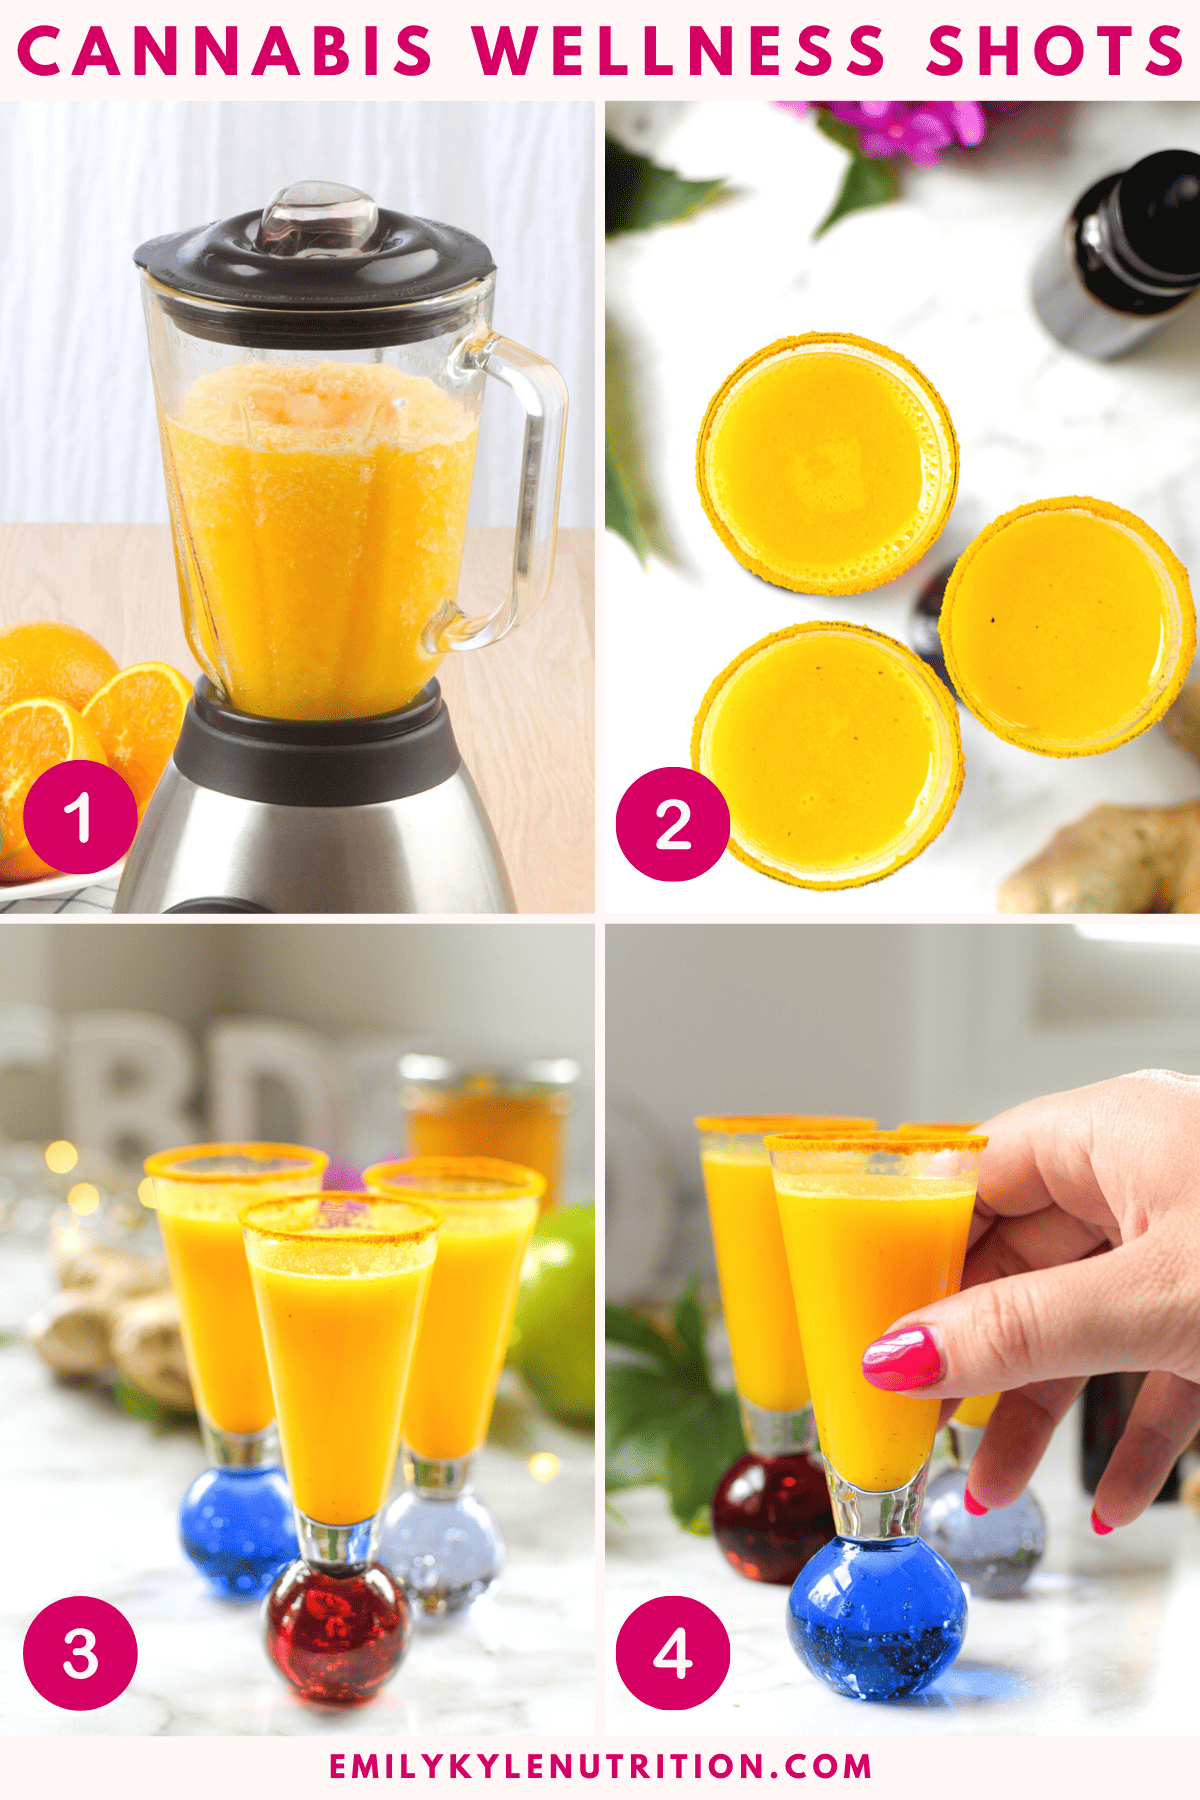 A four step image collage showing how to make cannabis wellness shots. 